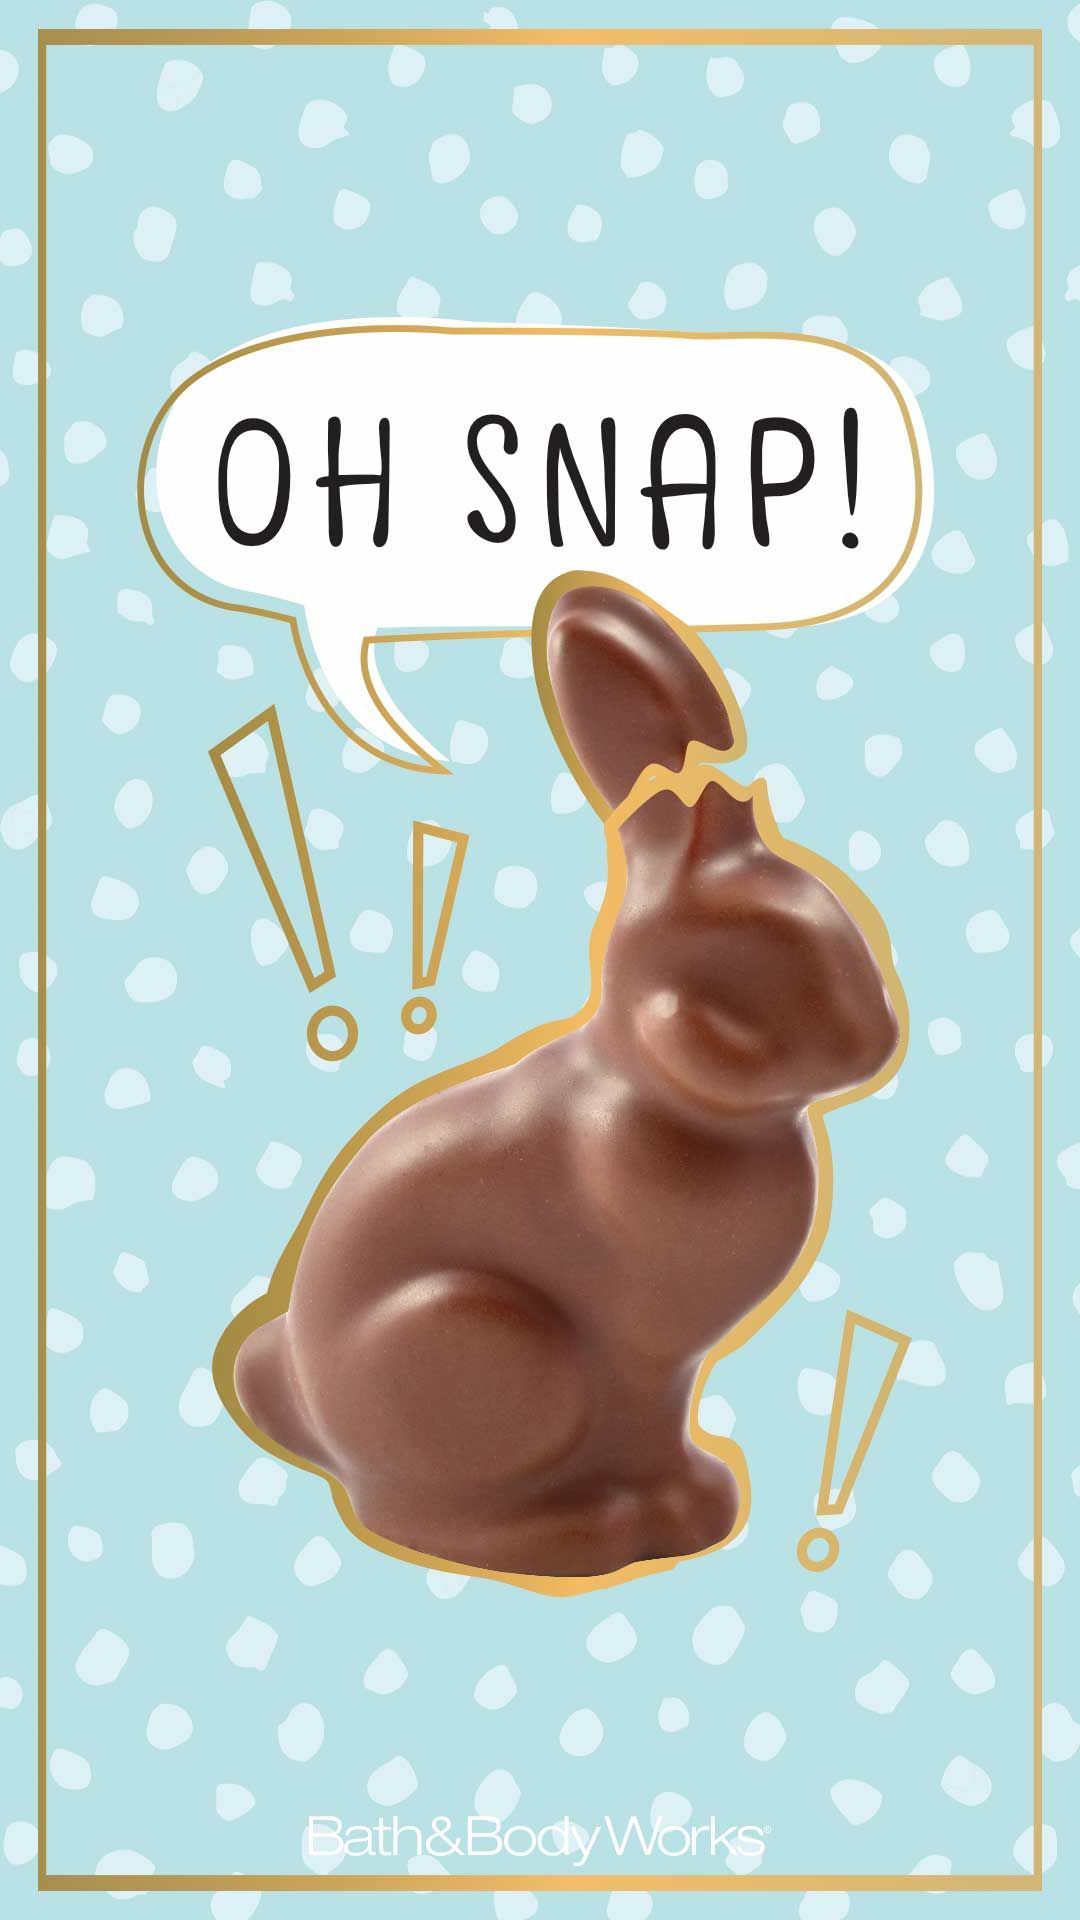 Oh, Snap! Easter iPhone Wallpaper. Easter wallpaper, Wallpaper, iPhone wallpaper